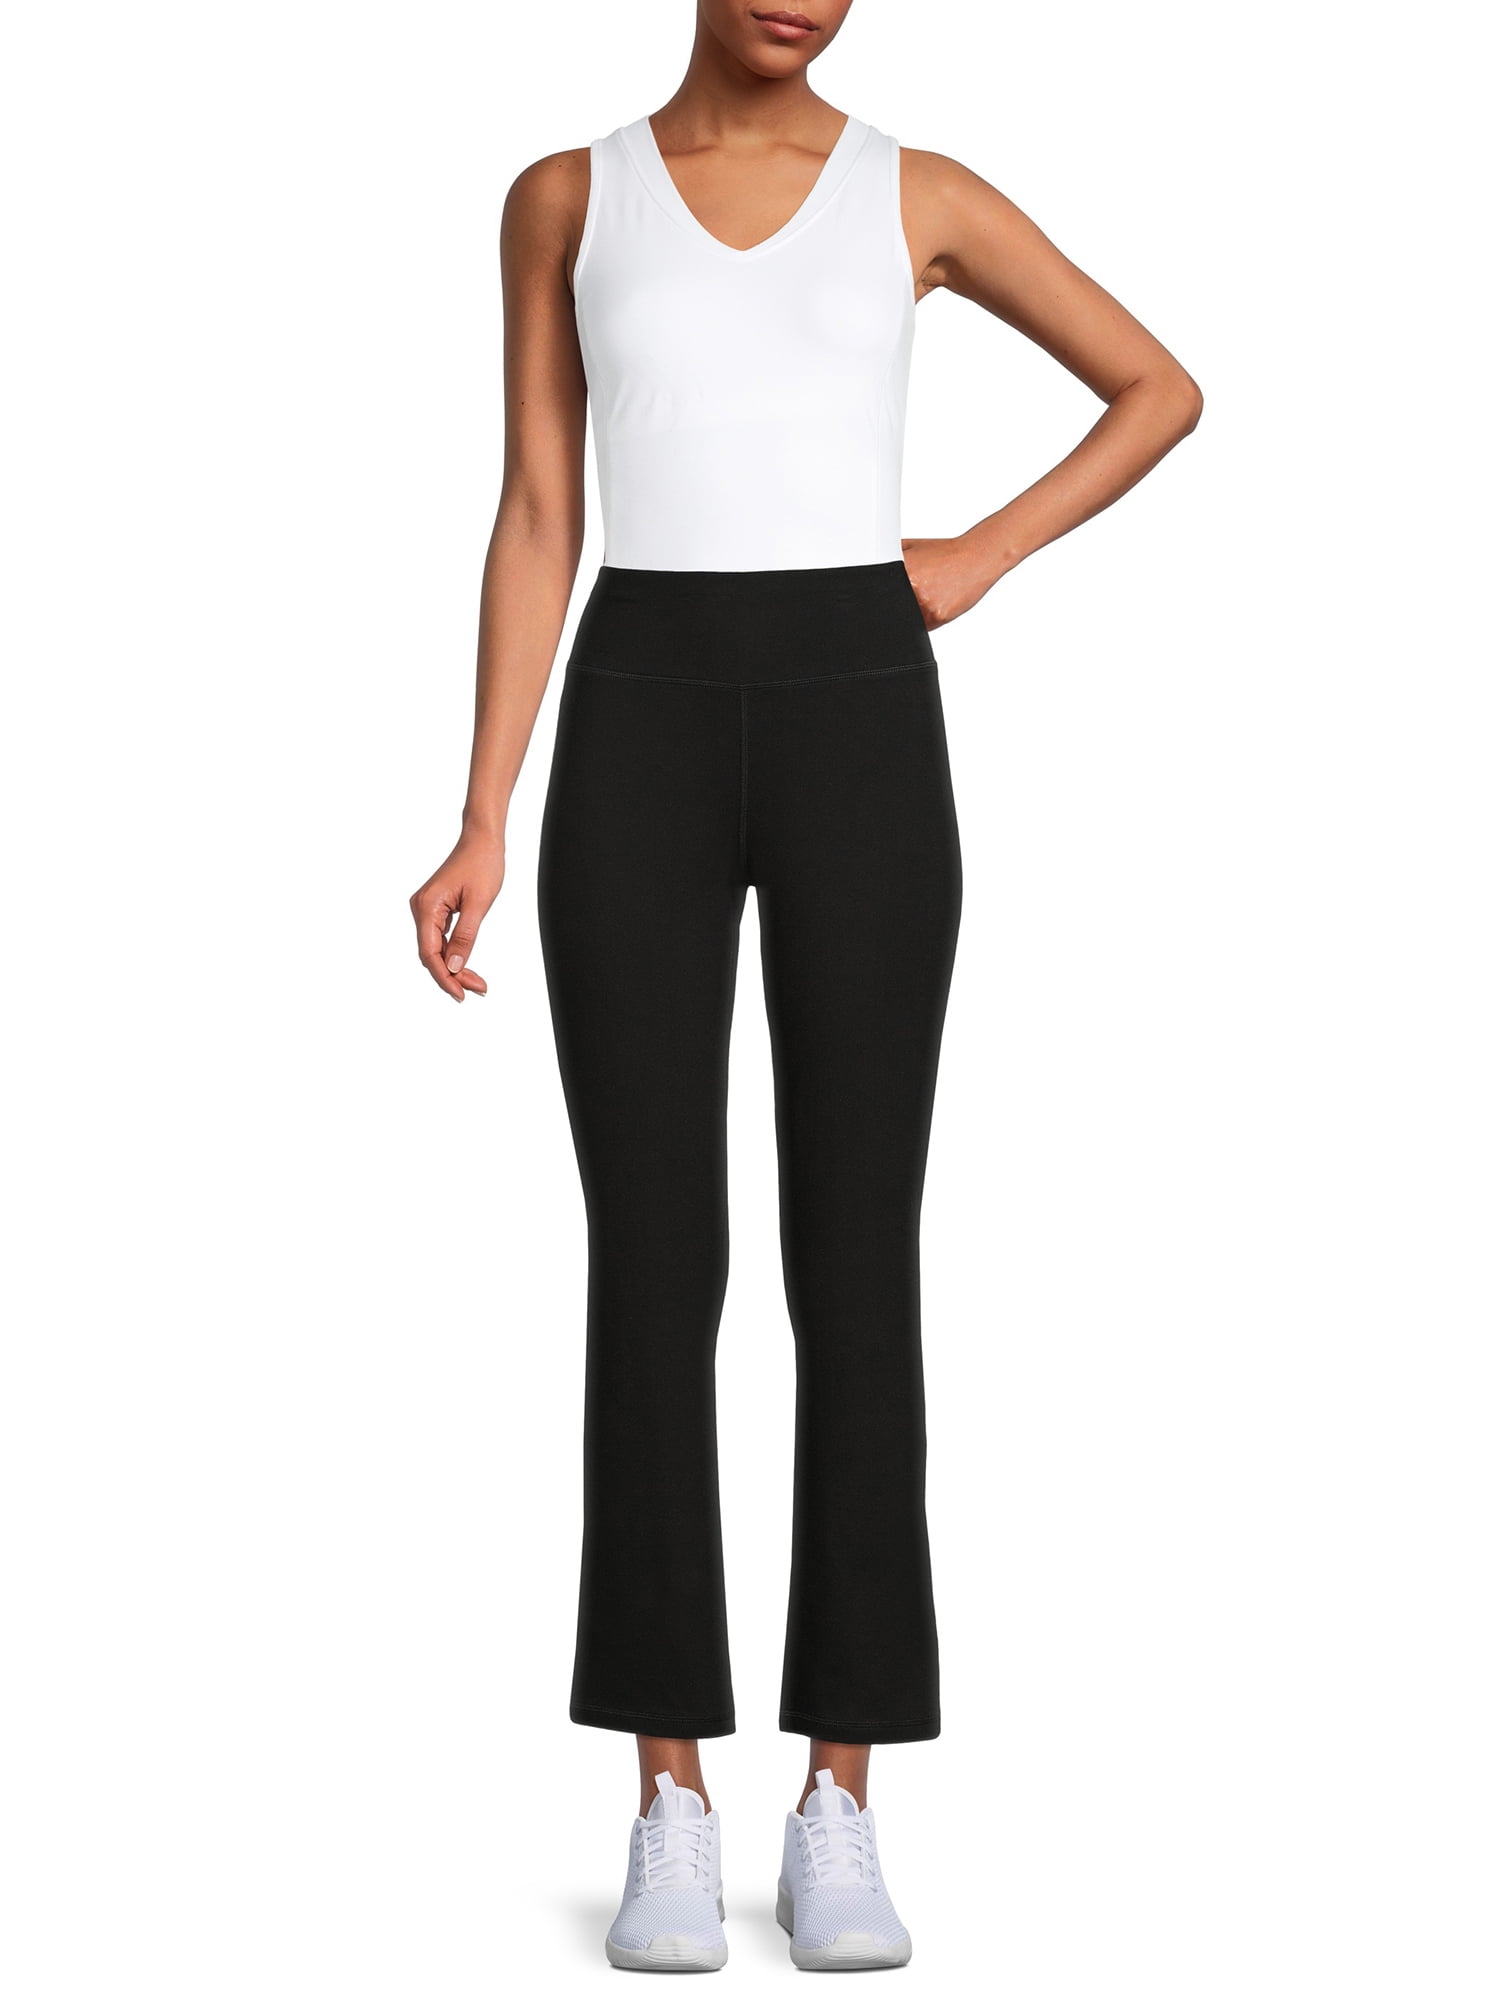 Athletic Works Women's Stretch Cotton Blend Ghana